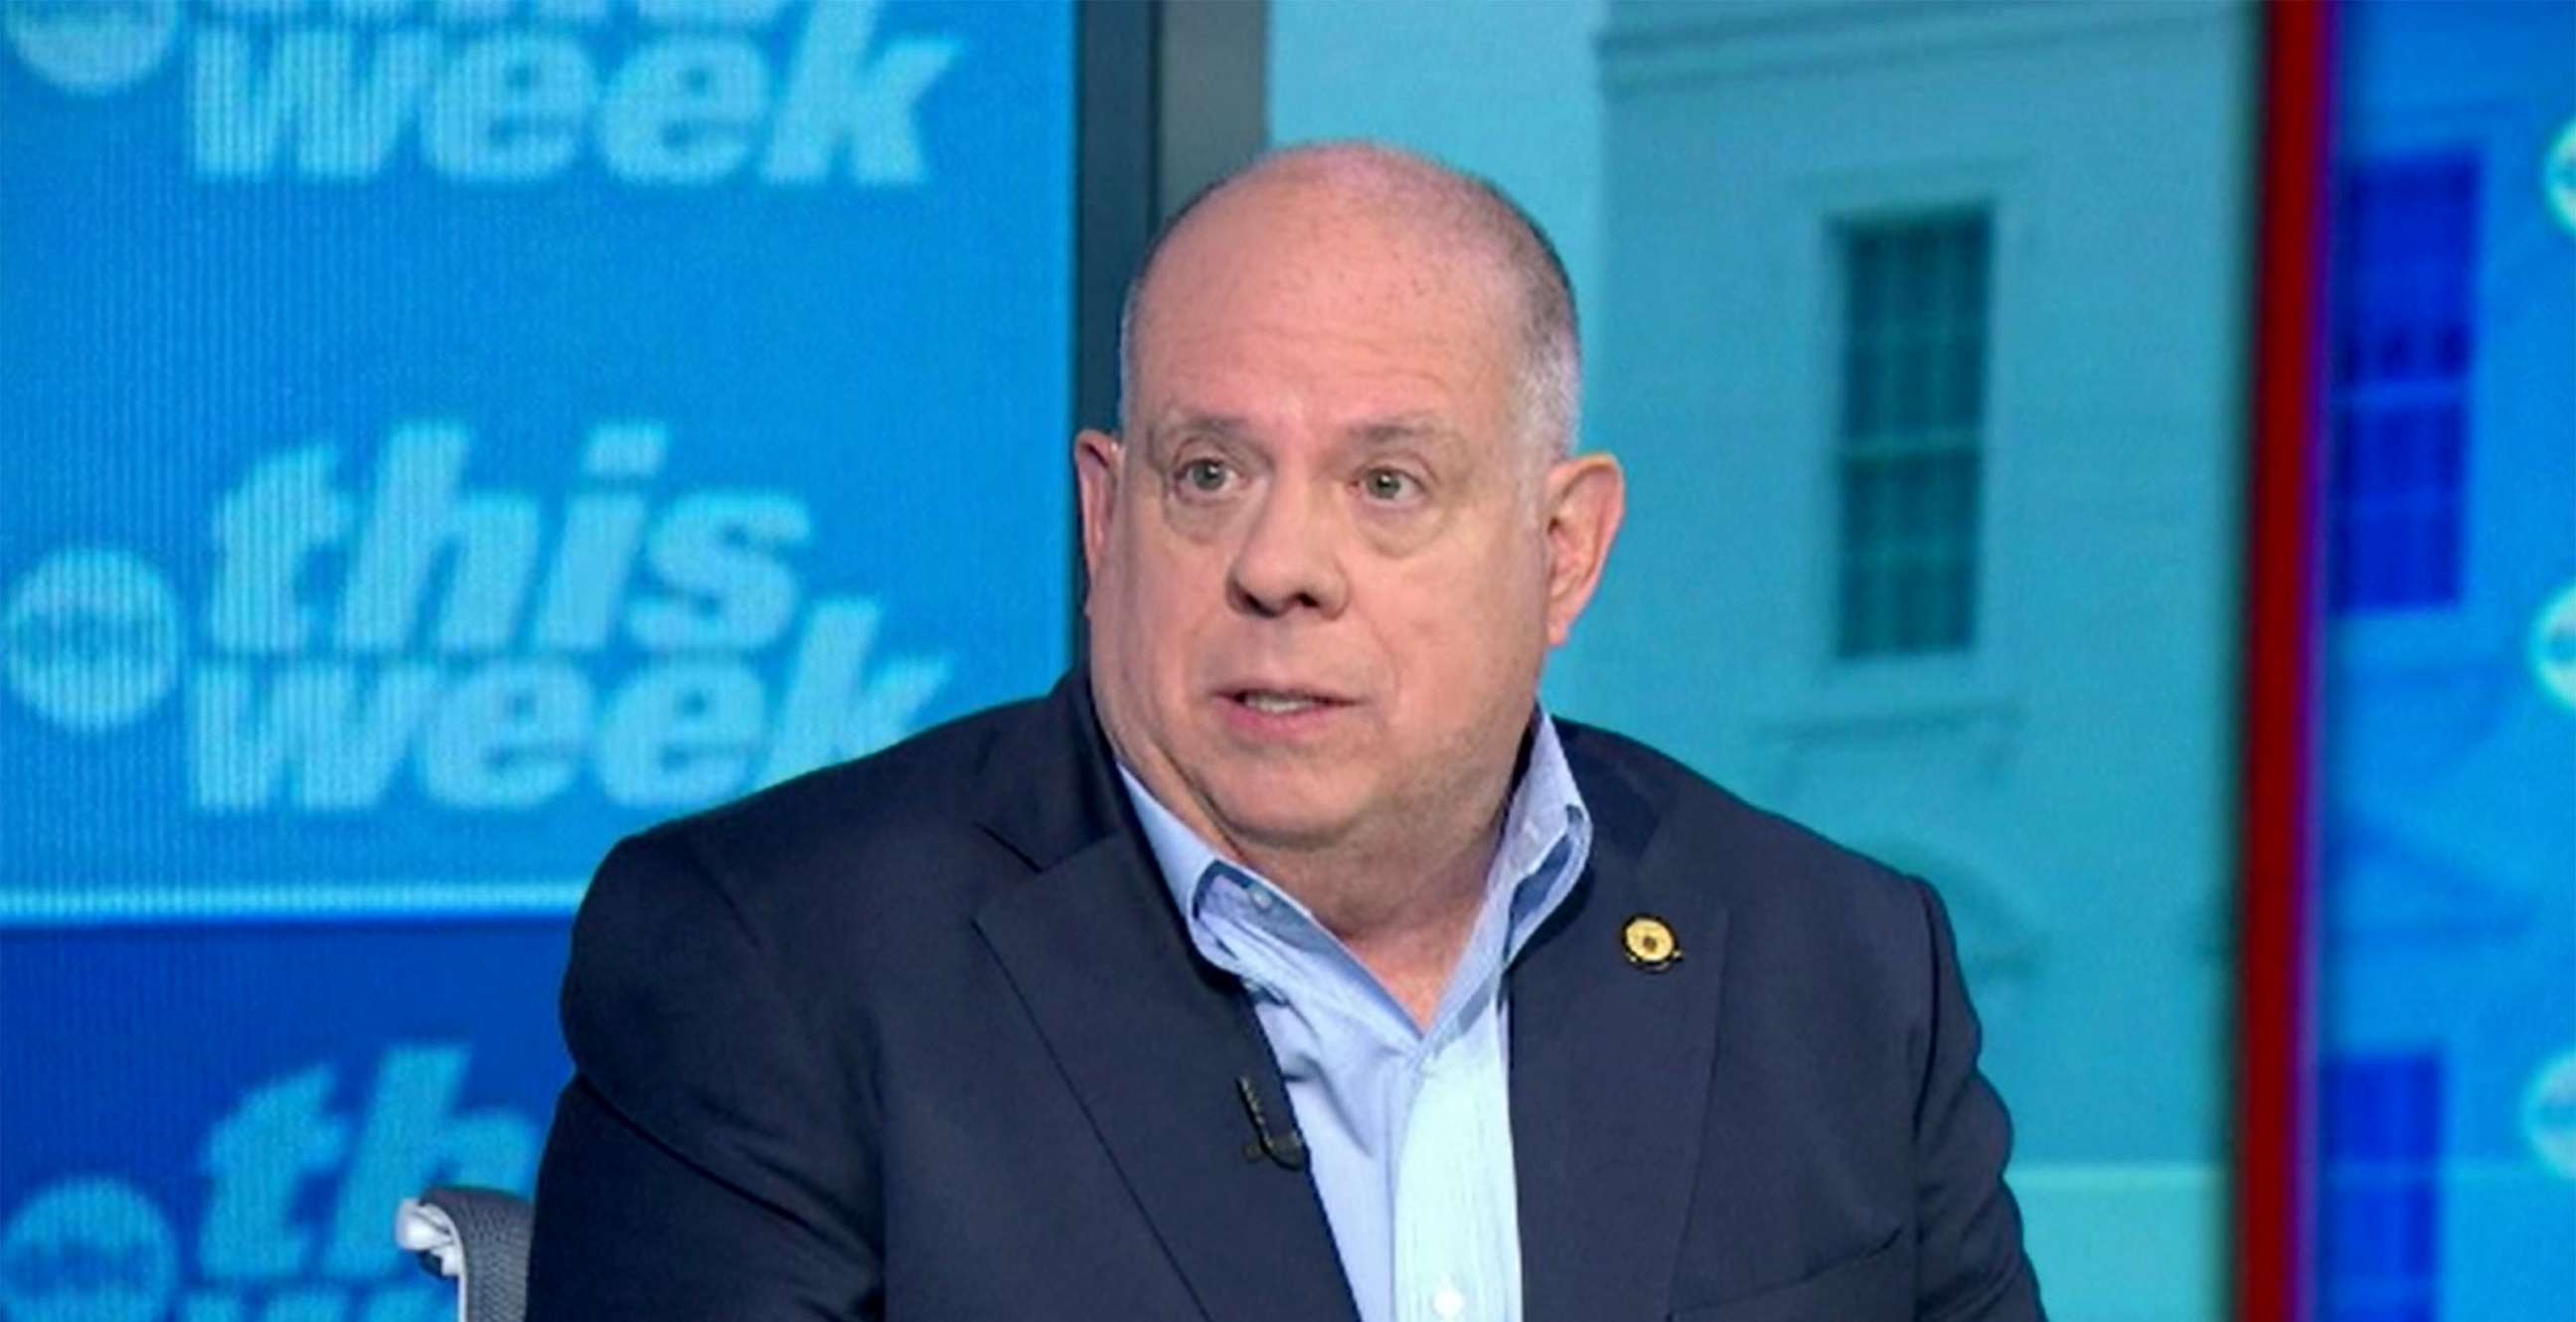 PHOTO: Gov. Larry Hogan is interviewed on ABC's "This Week" on August 14, 2022.